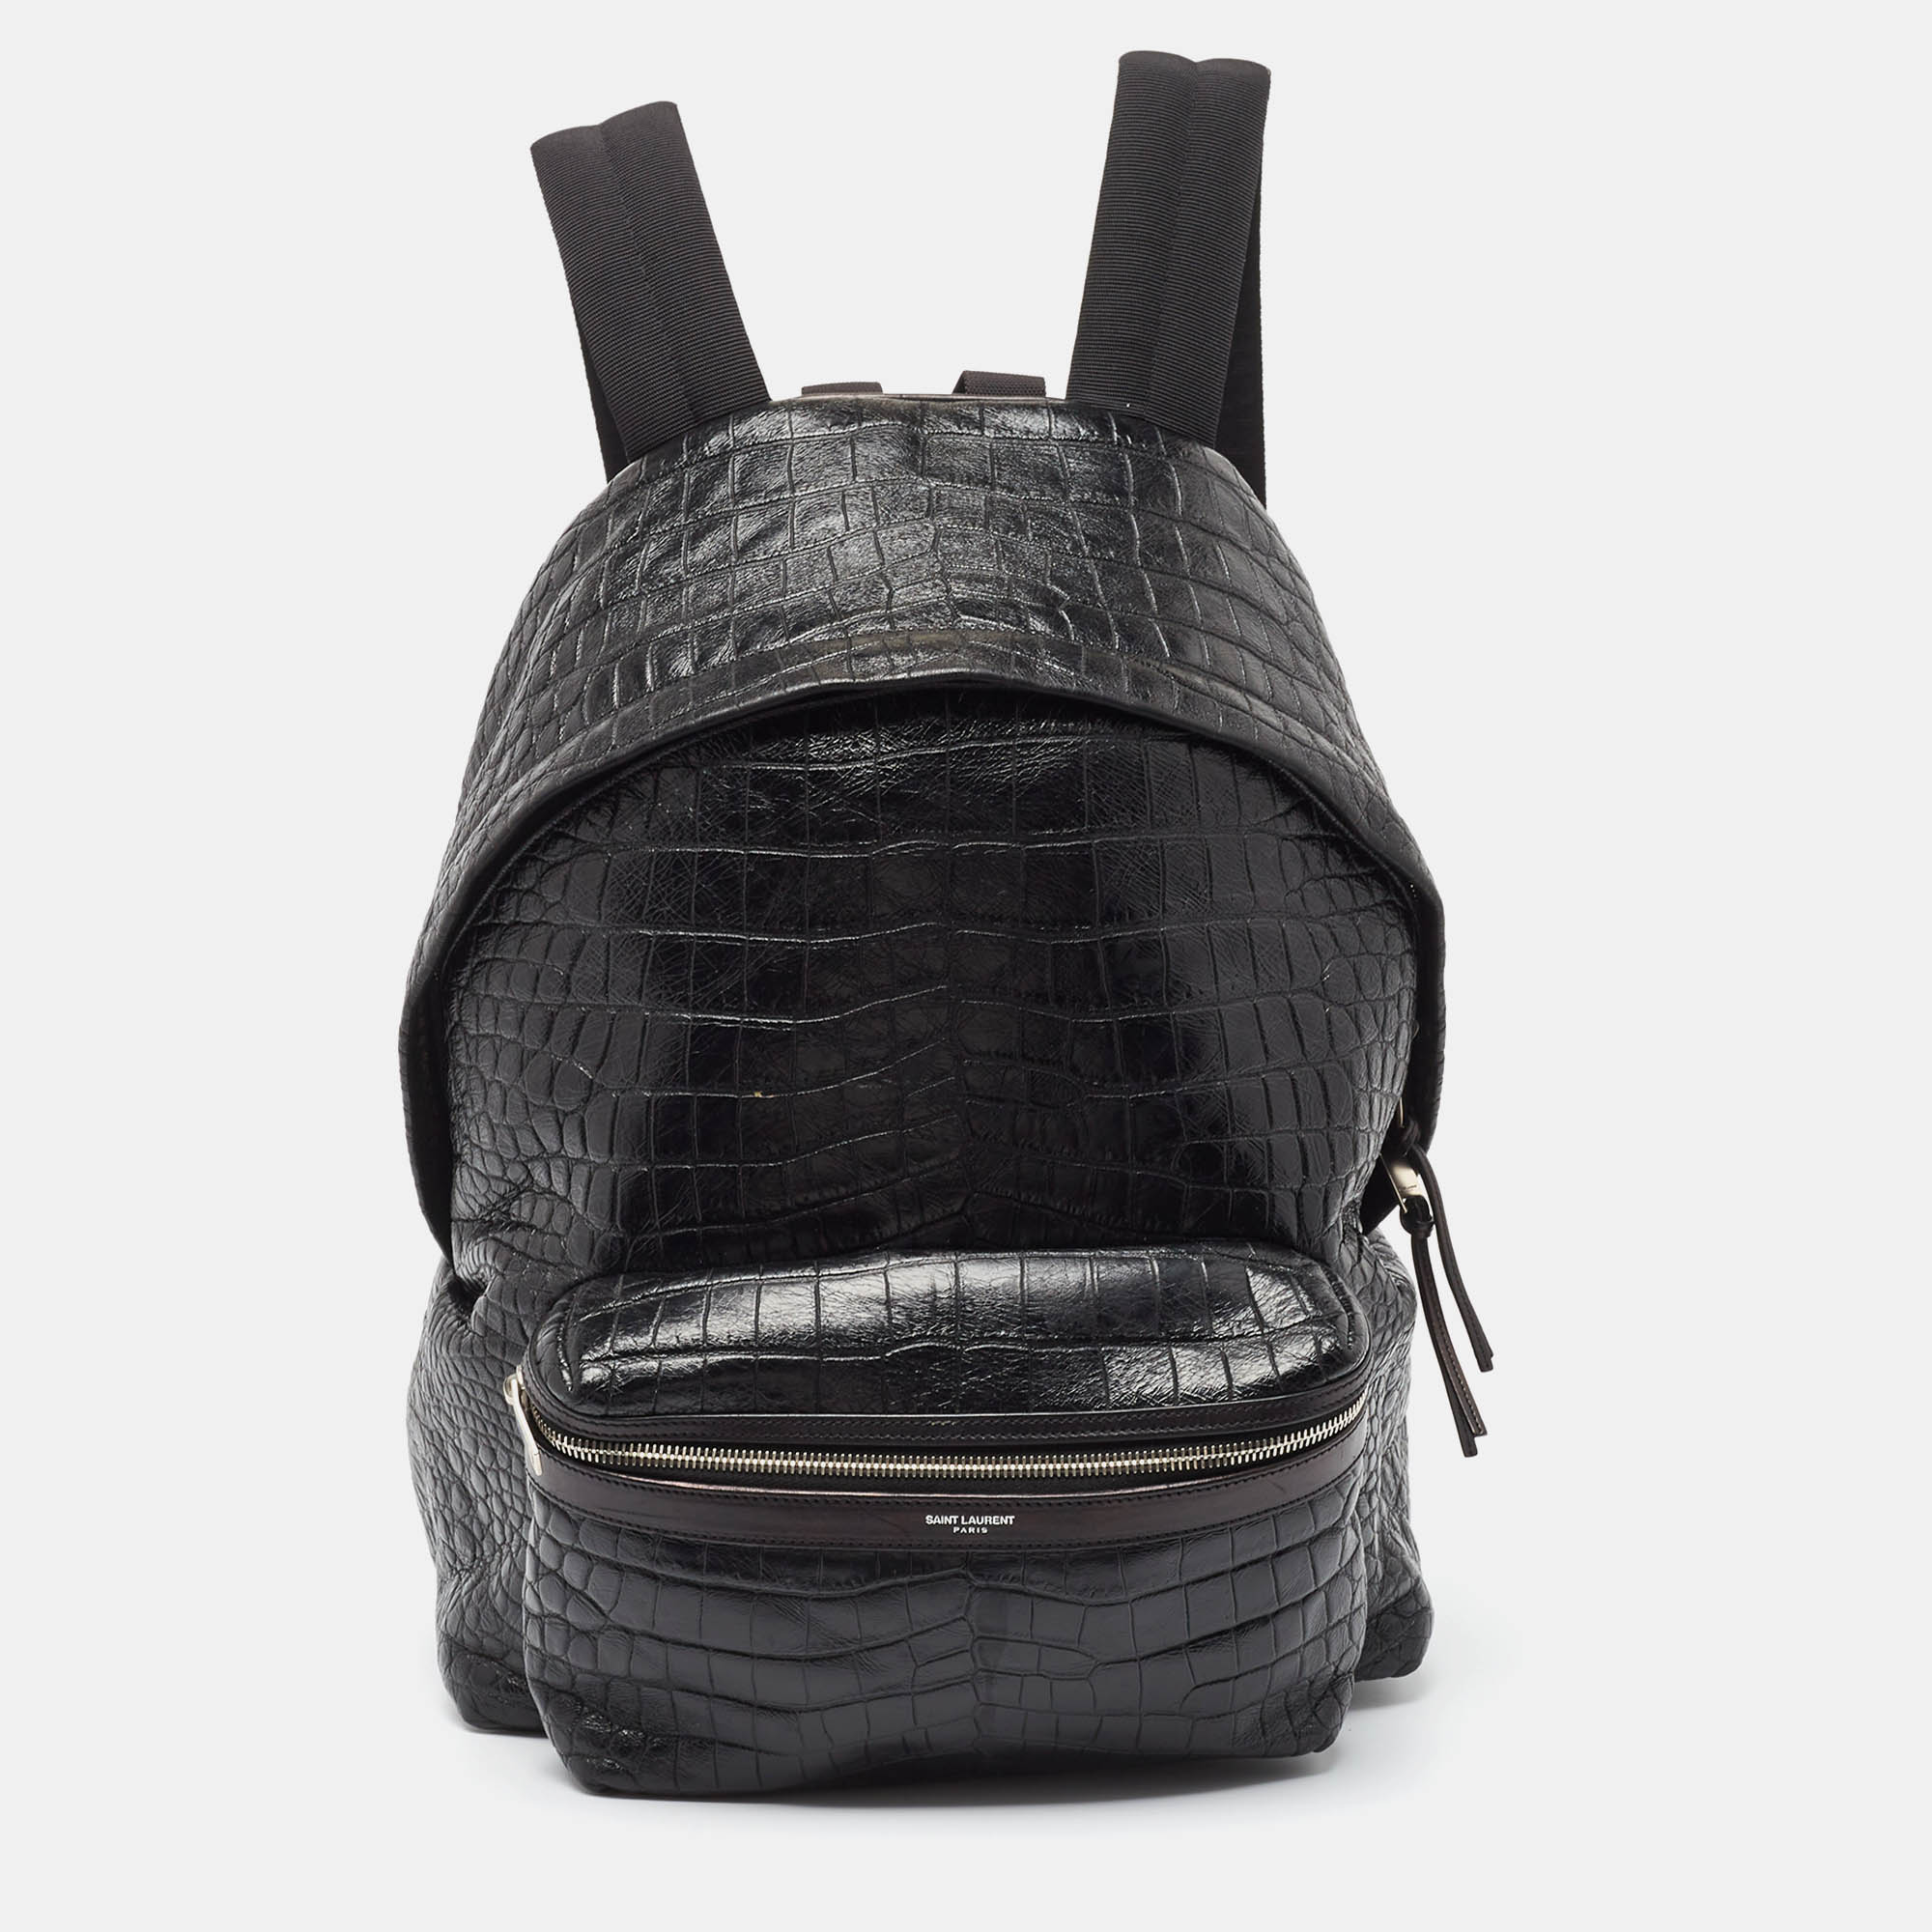 This practical and fashionable backpack will come in handy for daily use or as a style statement. It is smartly designed with a spacious interior for your belongings. Two shoulder straps make it ready to be yours.